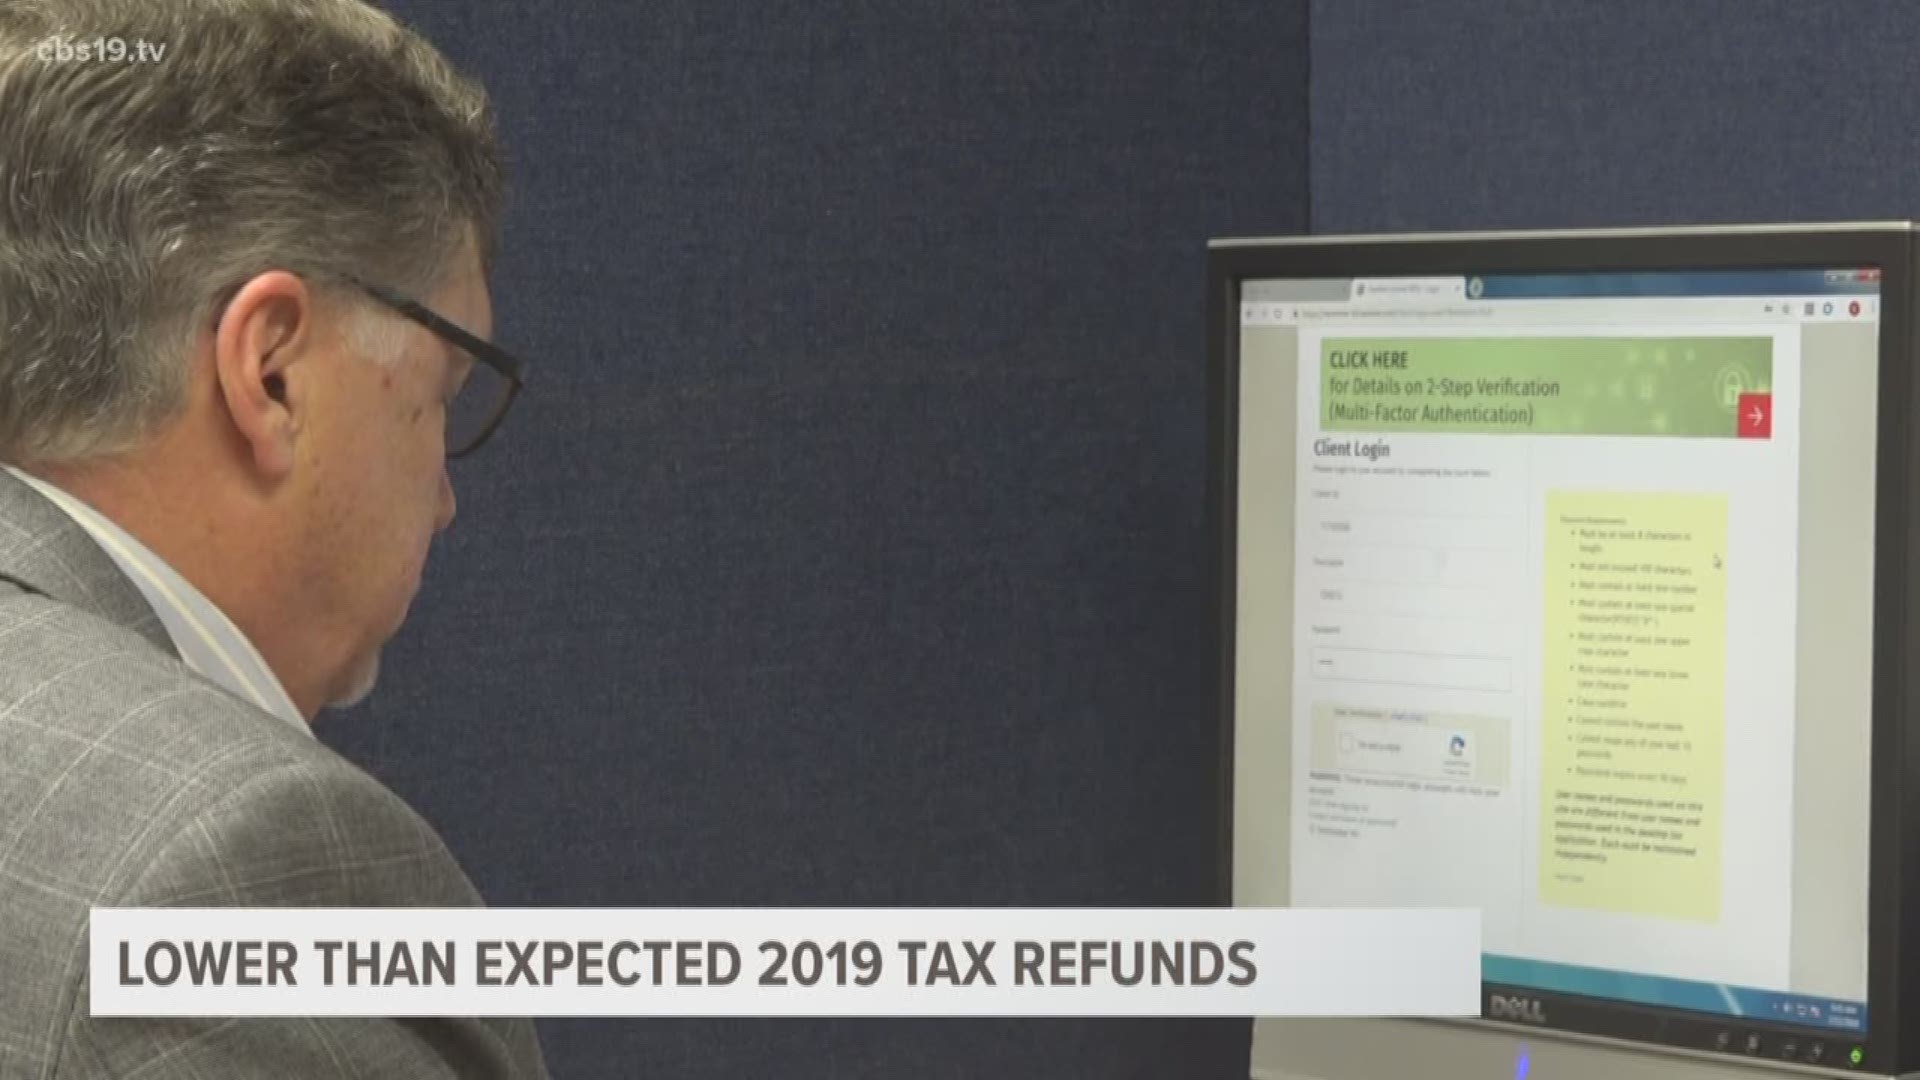 Many people who have already filed their taxes say they're seeing less in their refund checks than in previous years.